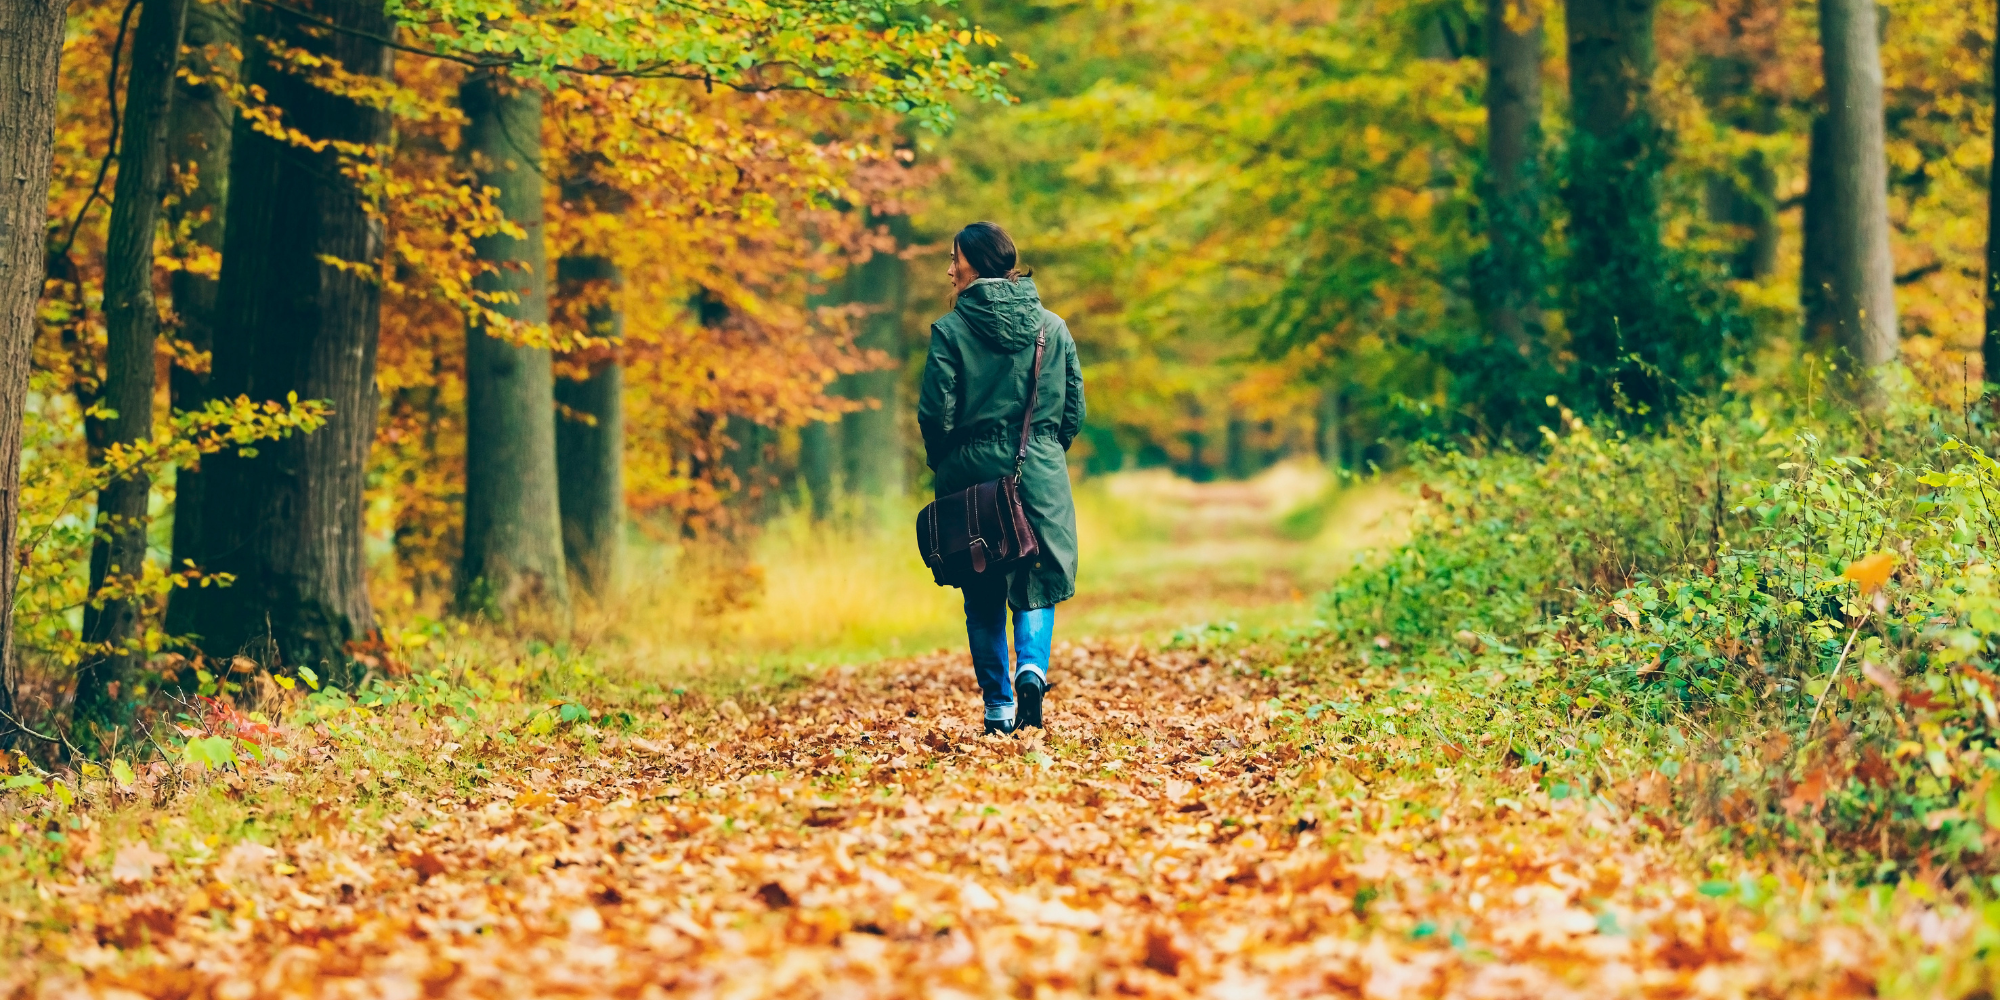 How to Practice Self-Care During the Fall Season